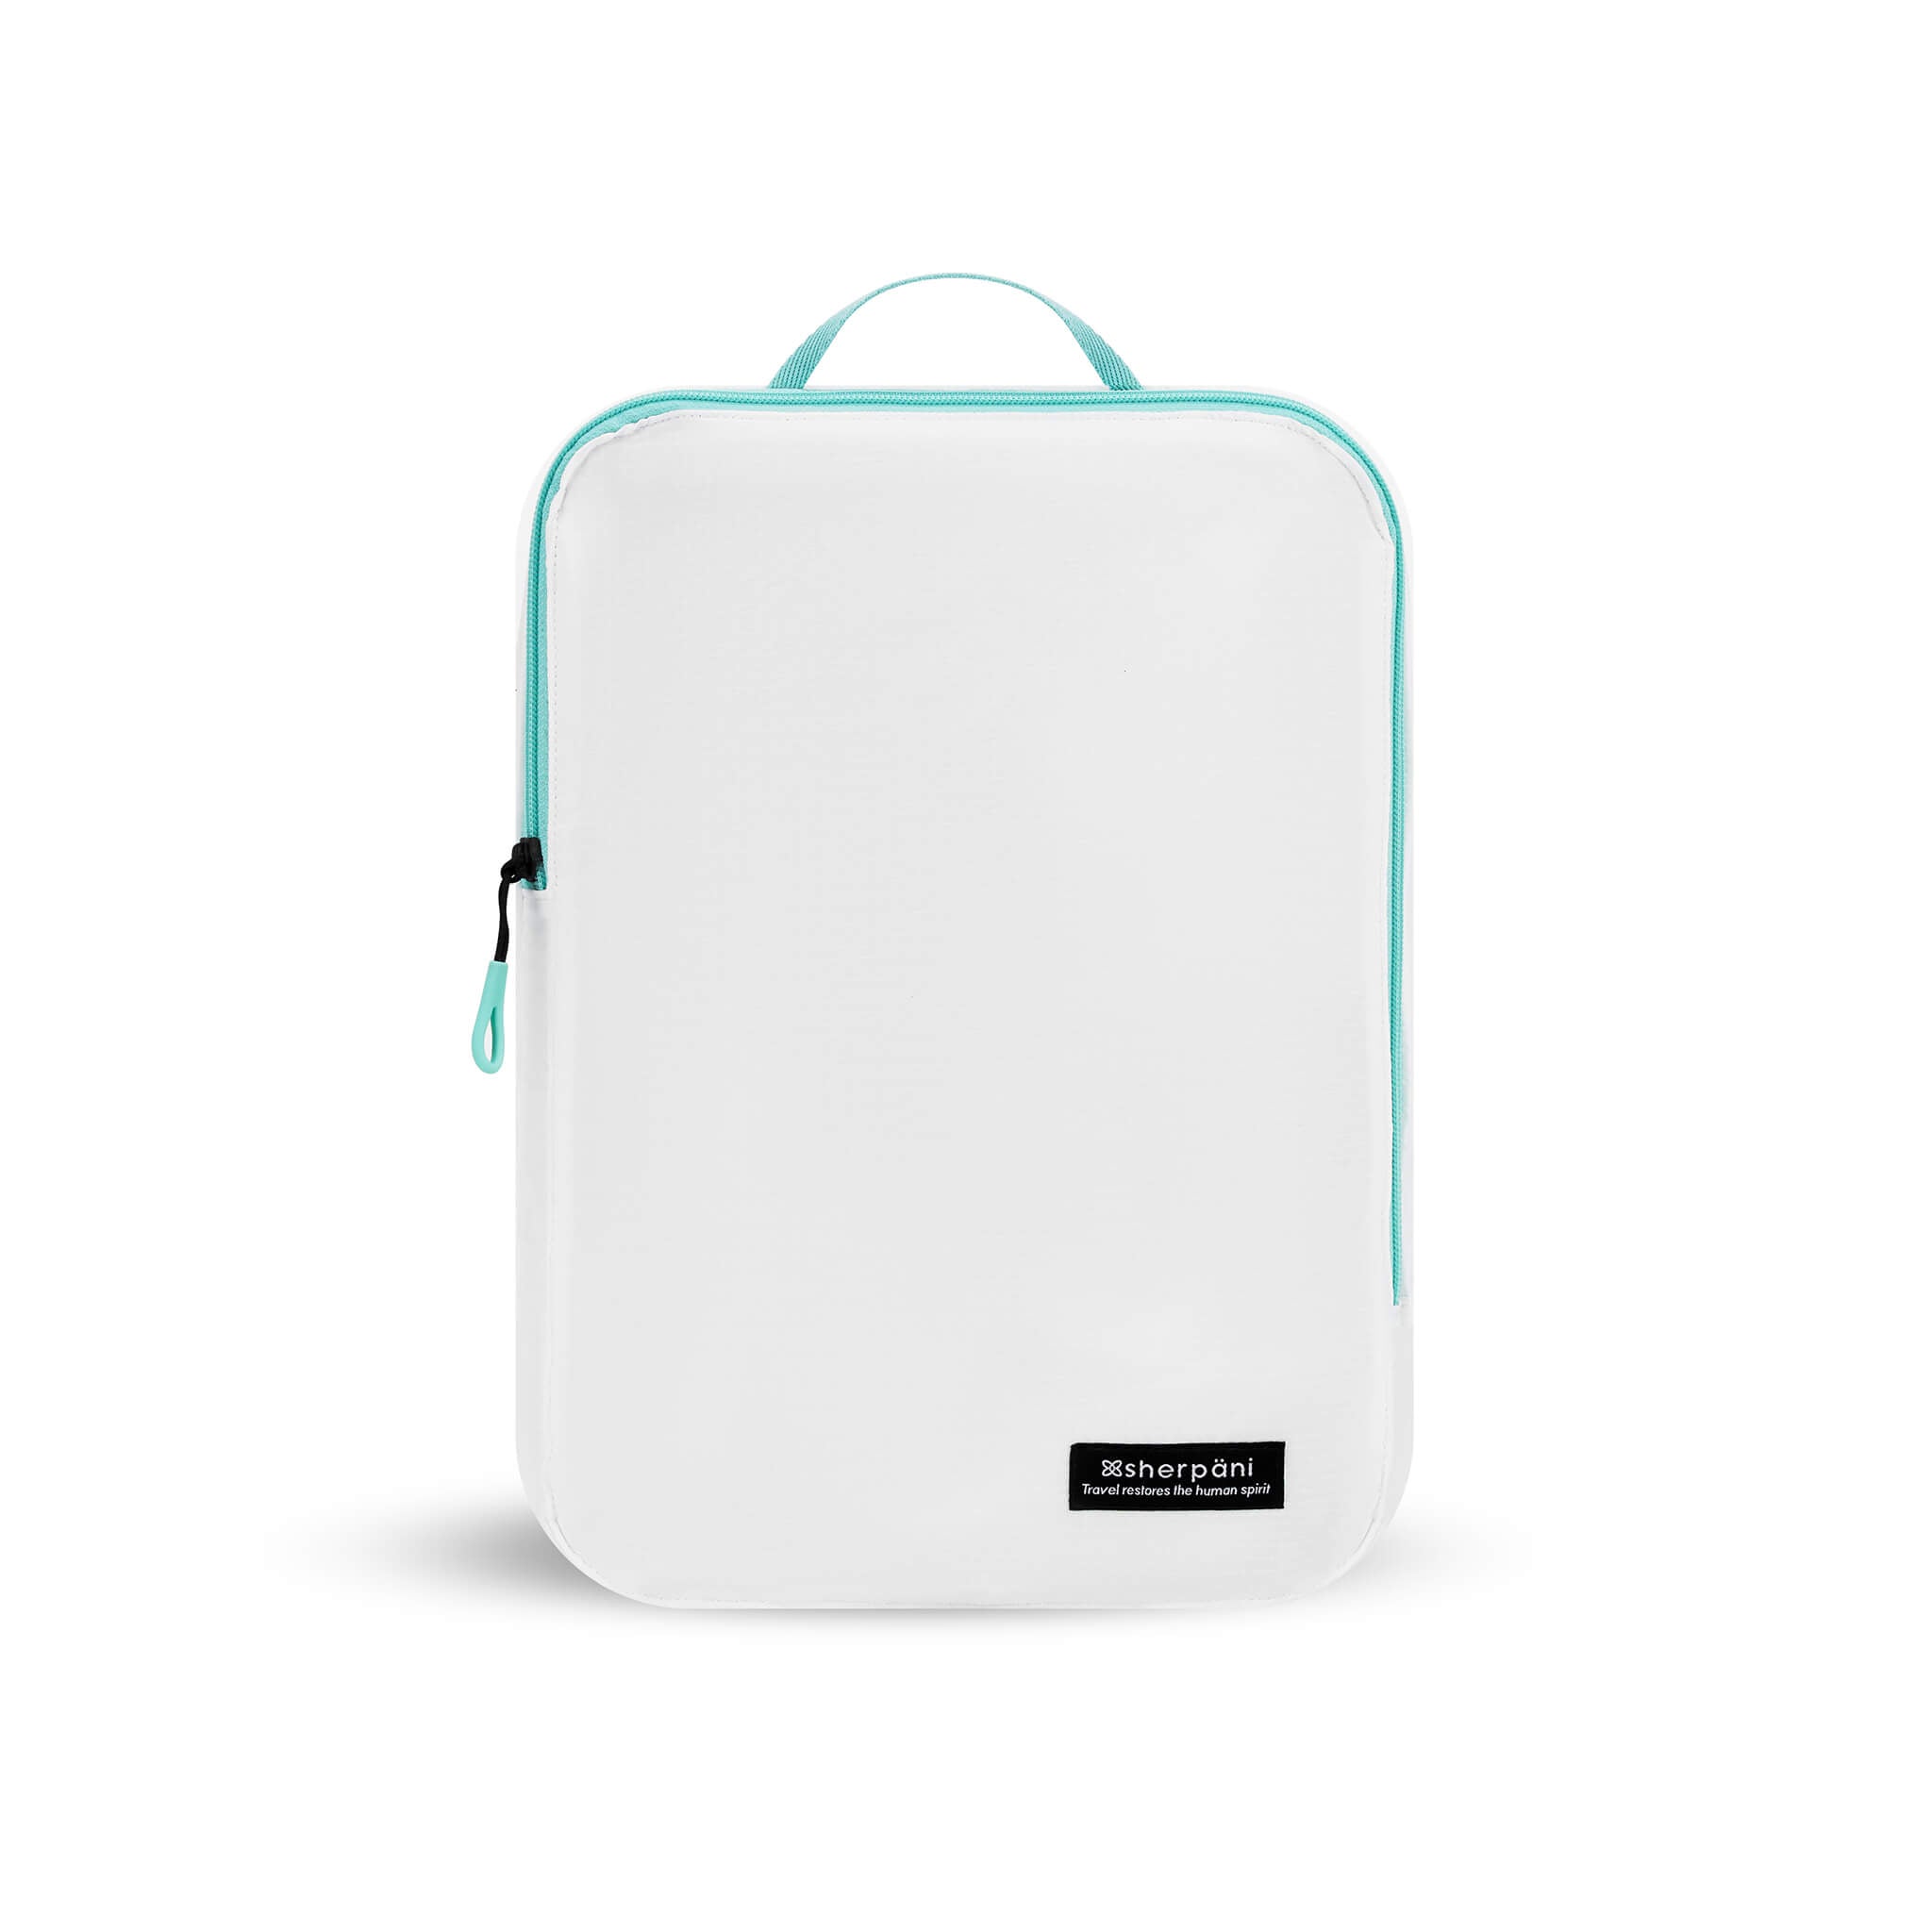 Flat front view of Compass Packing Cube in medium size. The cube is white with zipper and handle accented in aqua. 